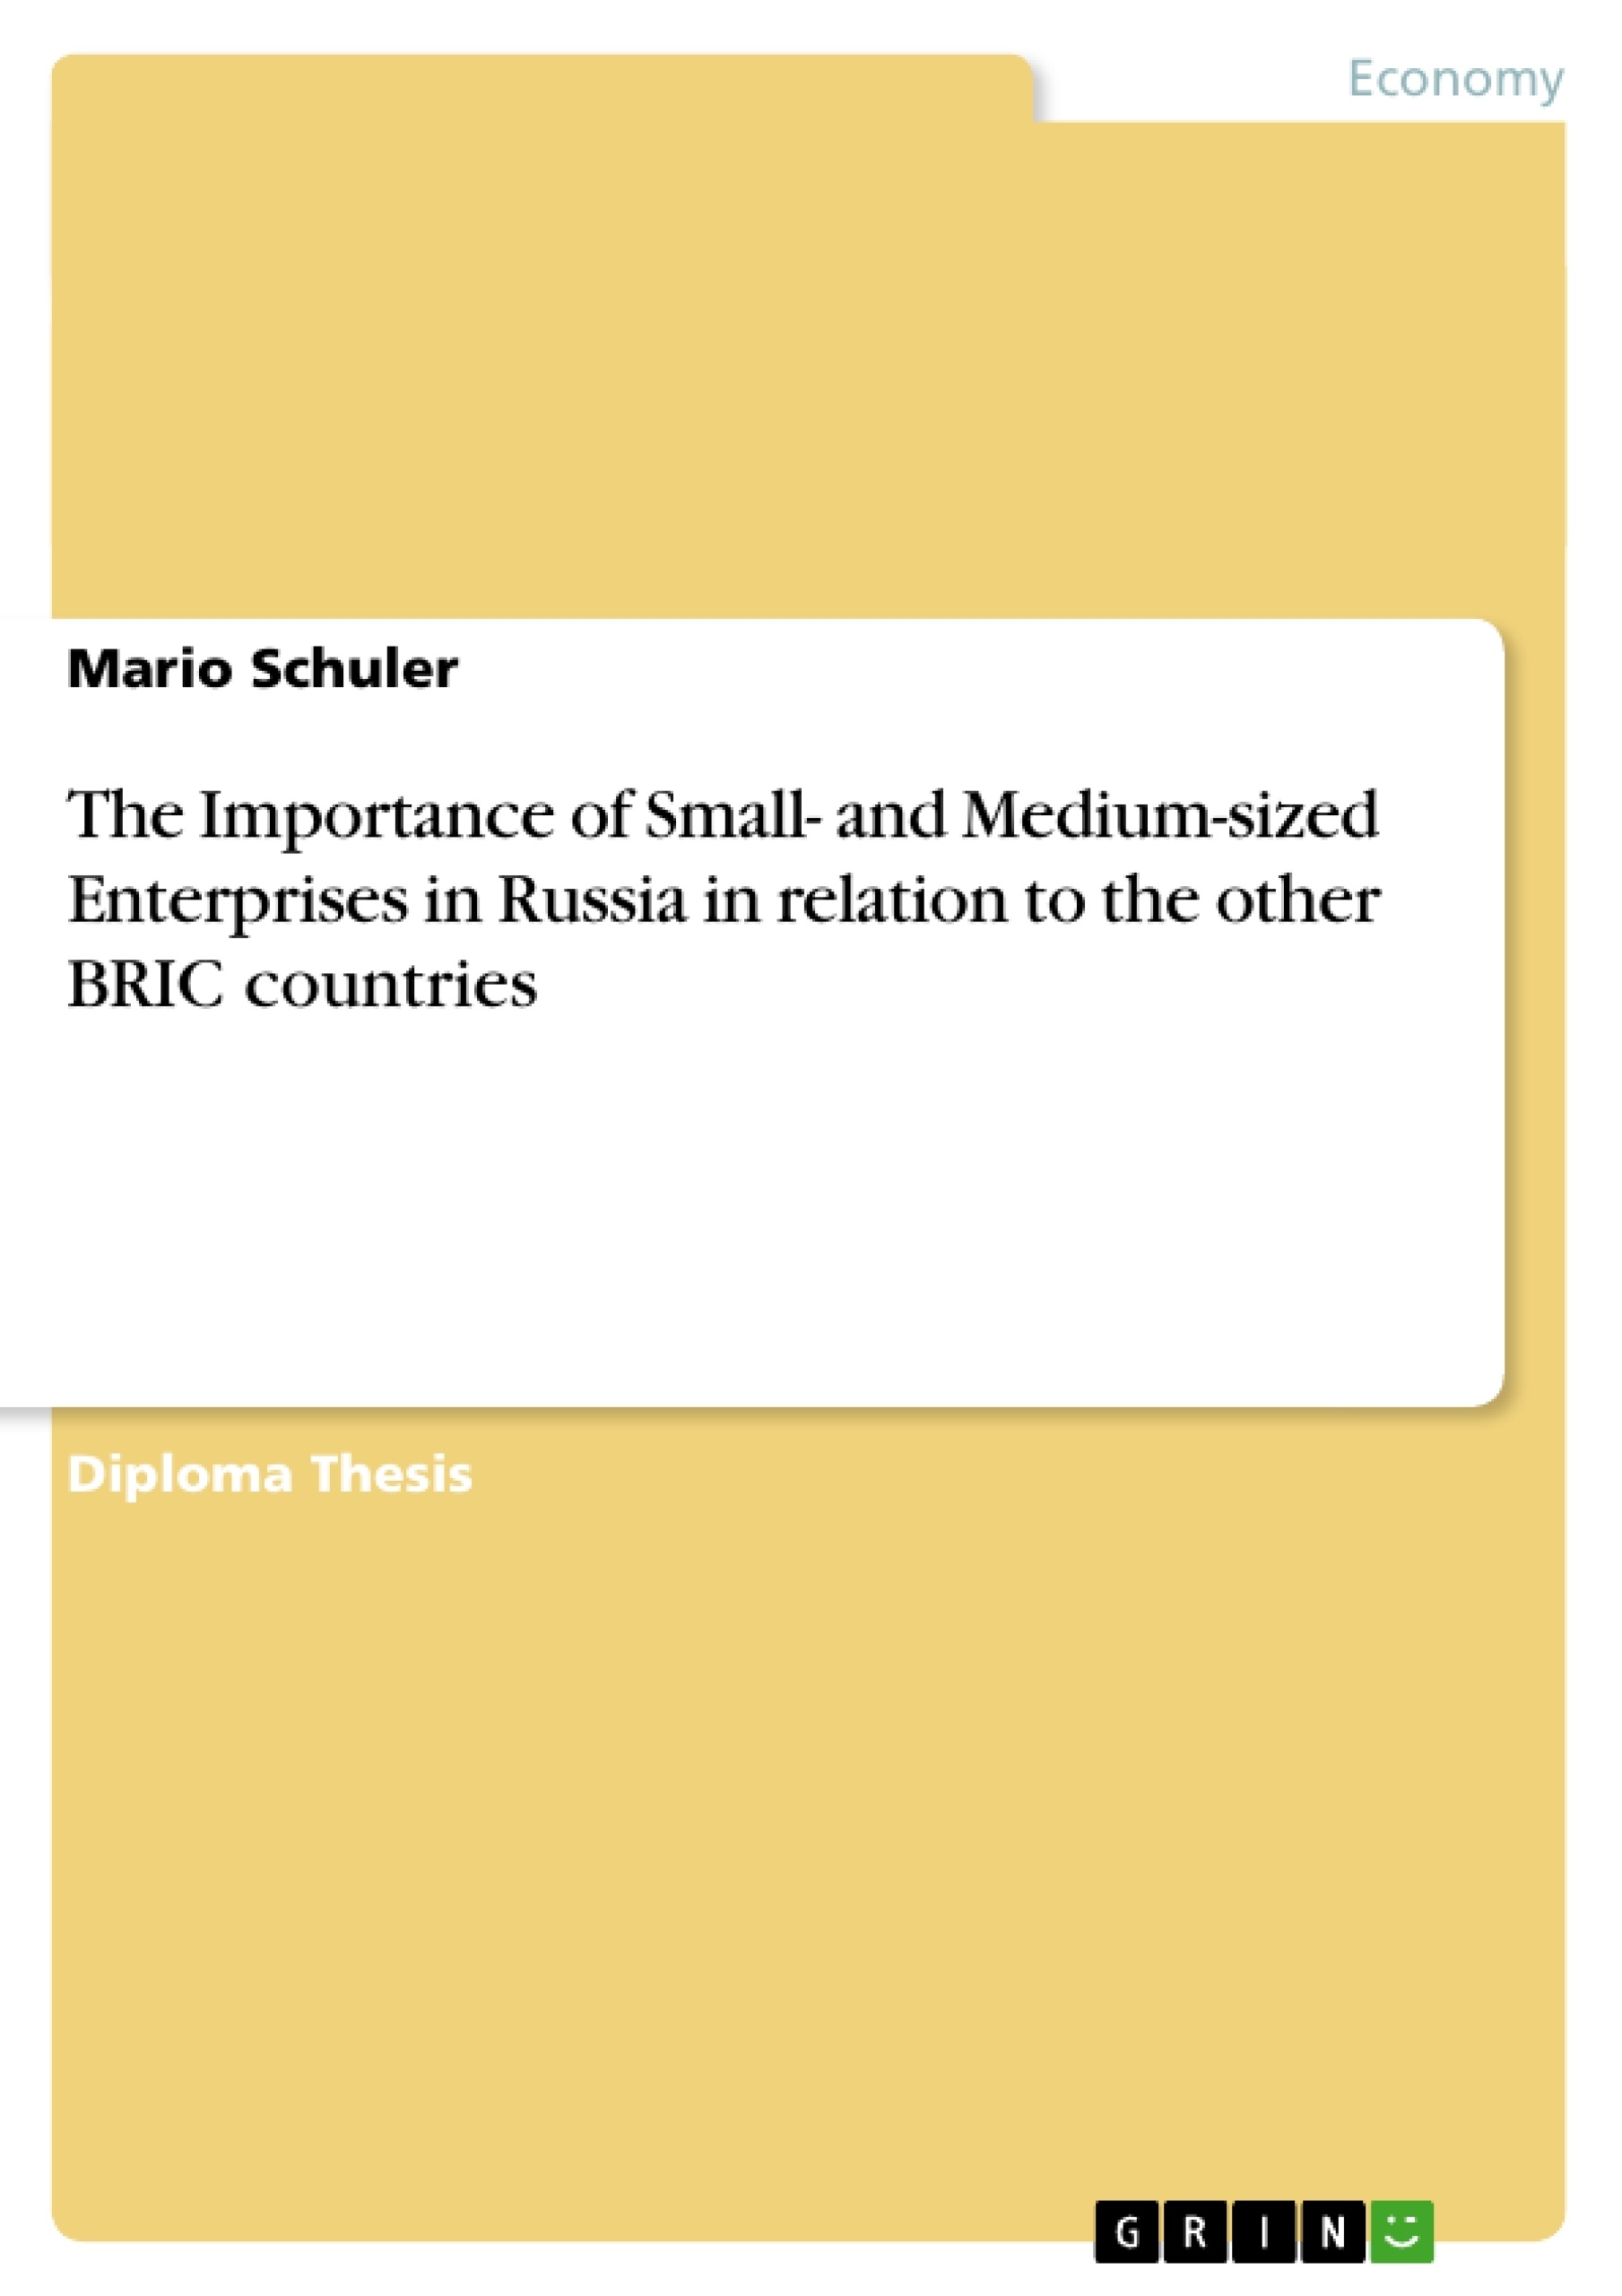 Title: The Importance of Small- and Medium-sized Enterprises in Russia in relation to the other BRIC countries